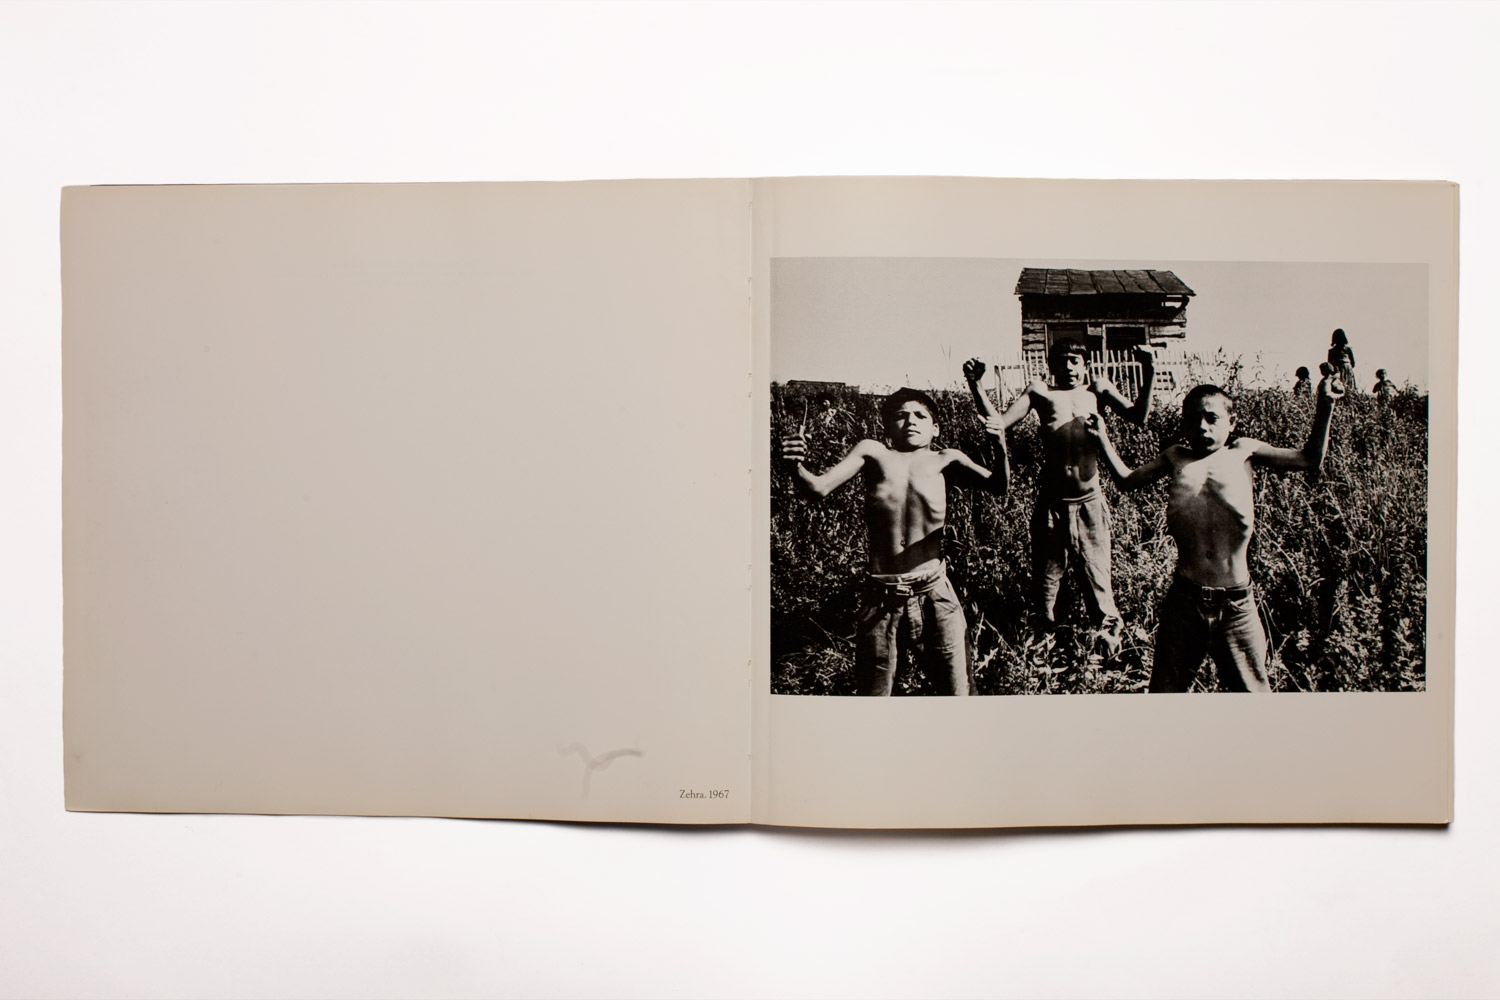 The original printing of Gypsies boils down hundreds of images shot over six years into a tightly edited sequence of 60 photographs, starting with the opening image of three boys flexing their arms and drawing in their stomachs in a show of strength.